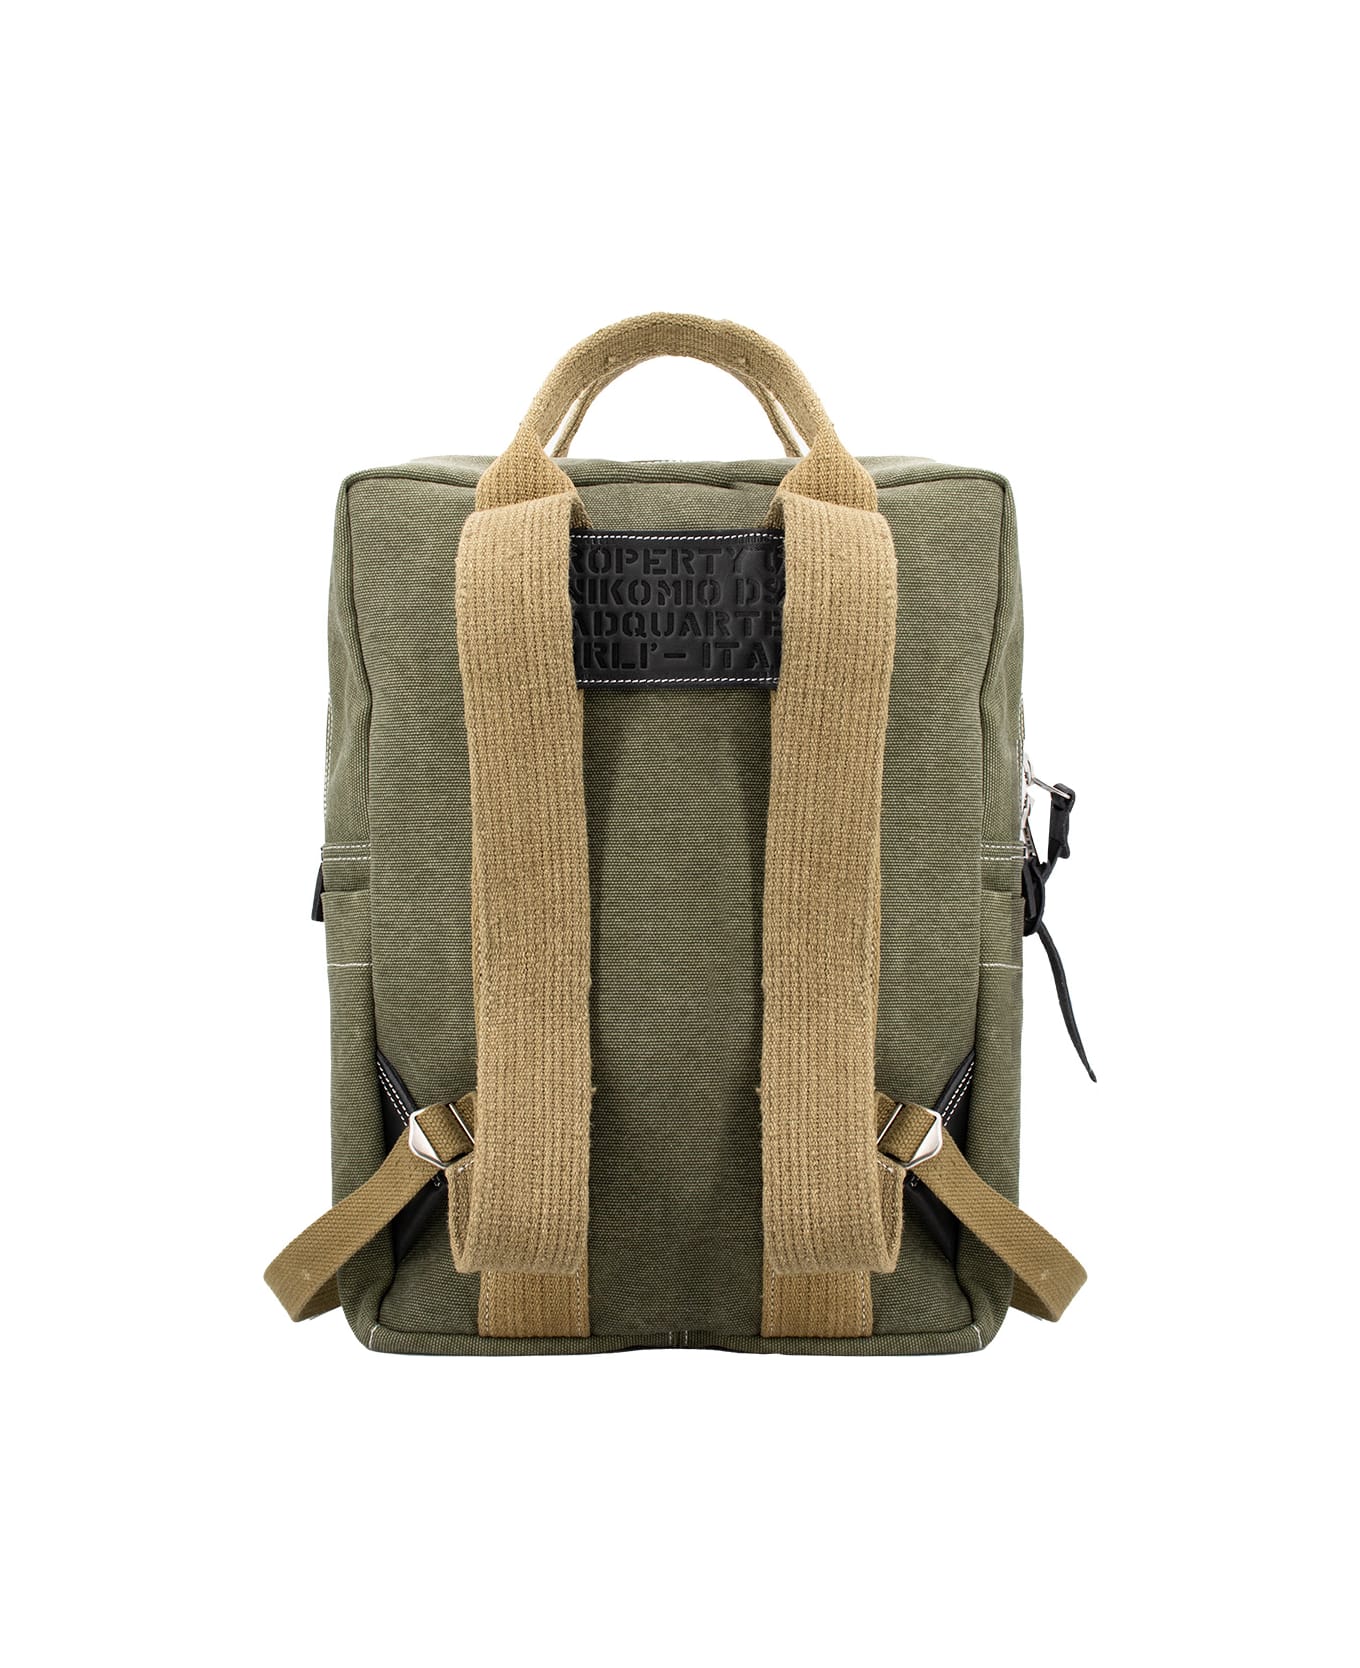 Manikomio Dsgn Backpack - MILITARY STRONG